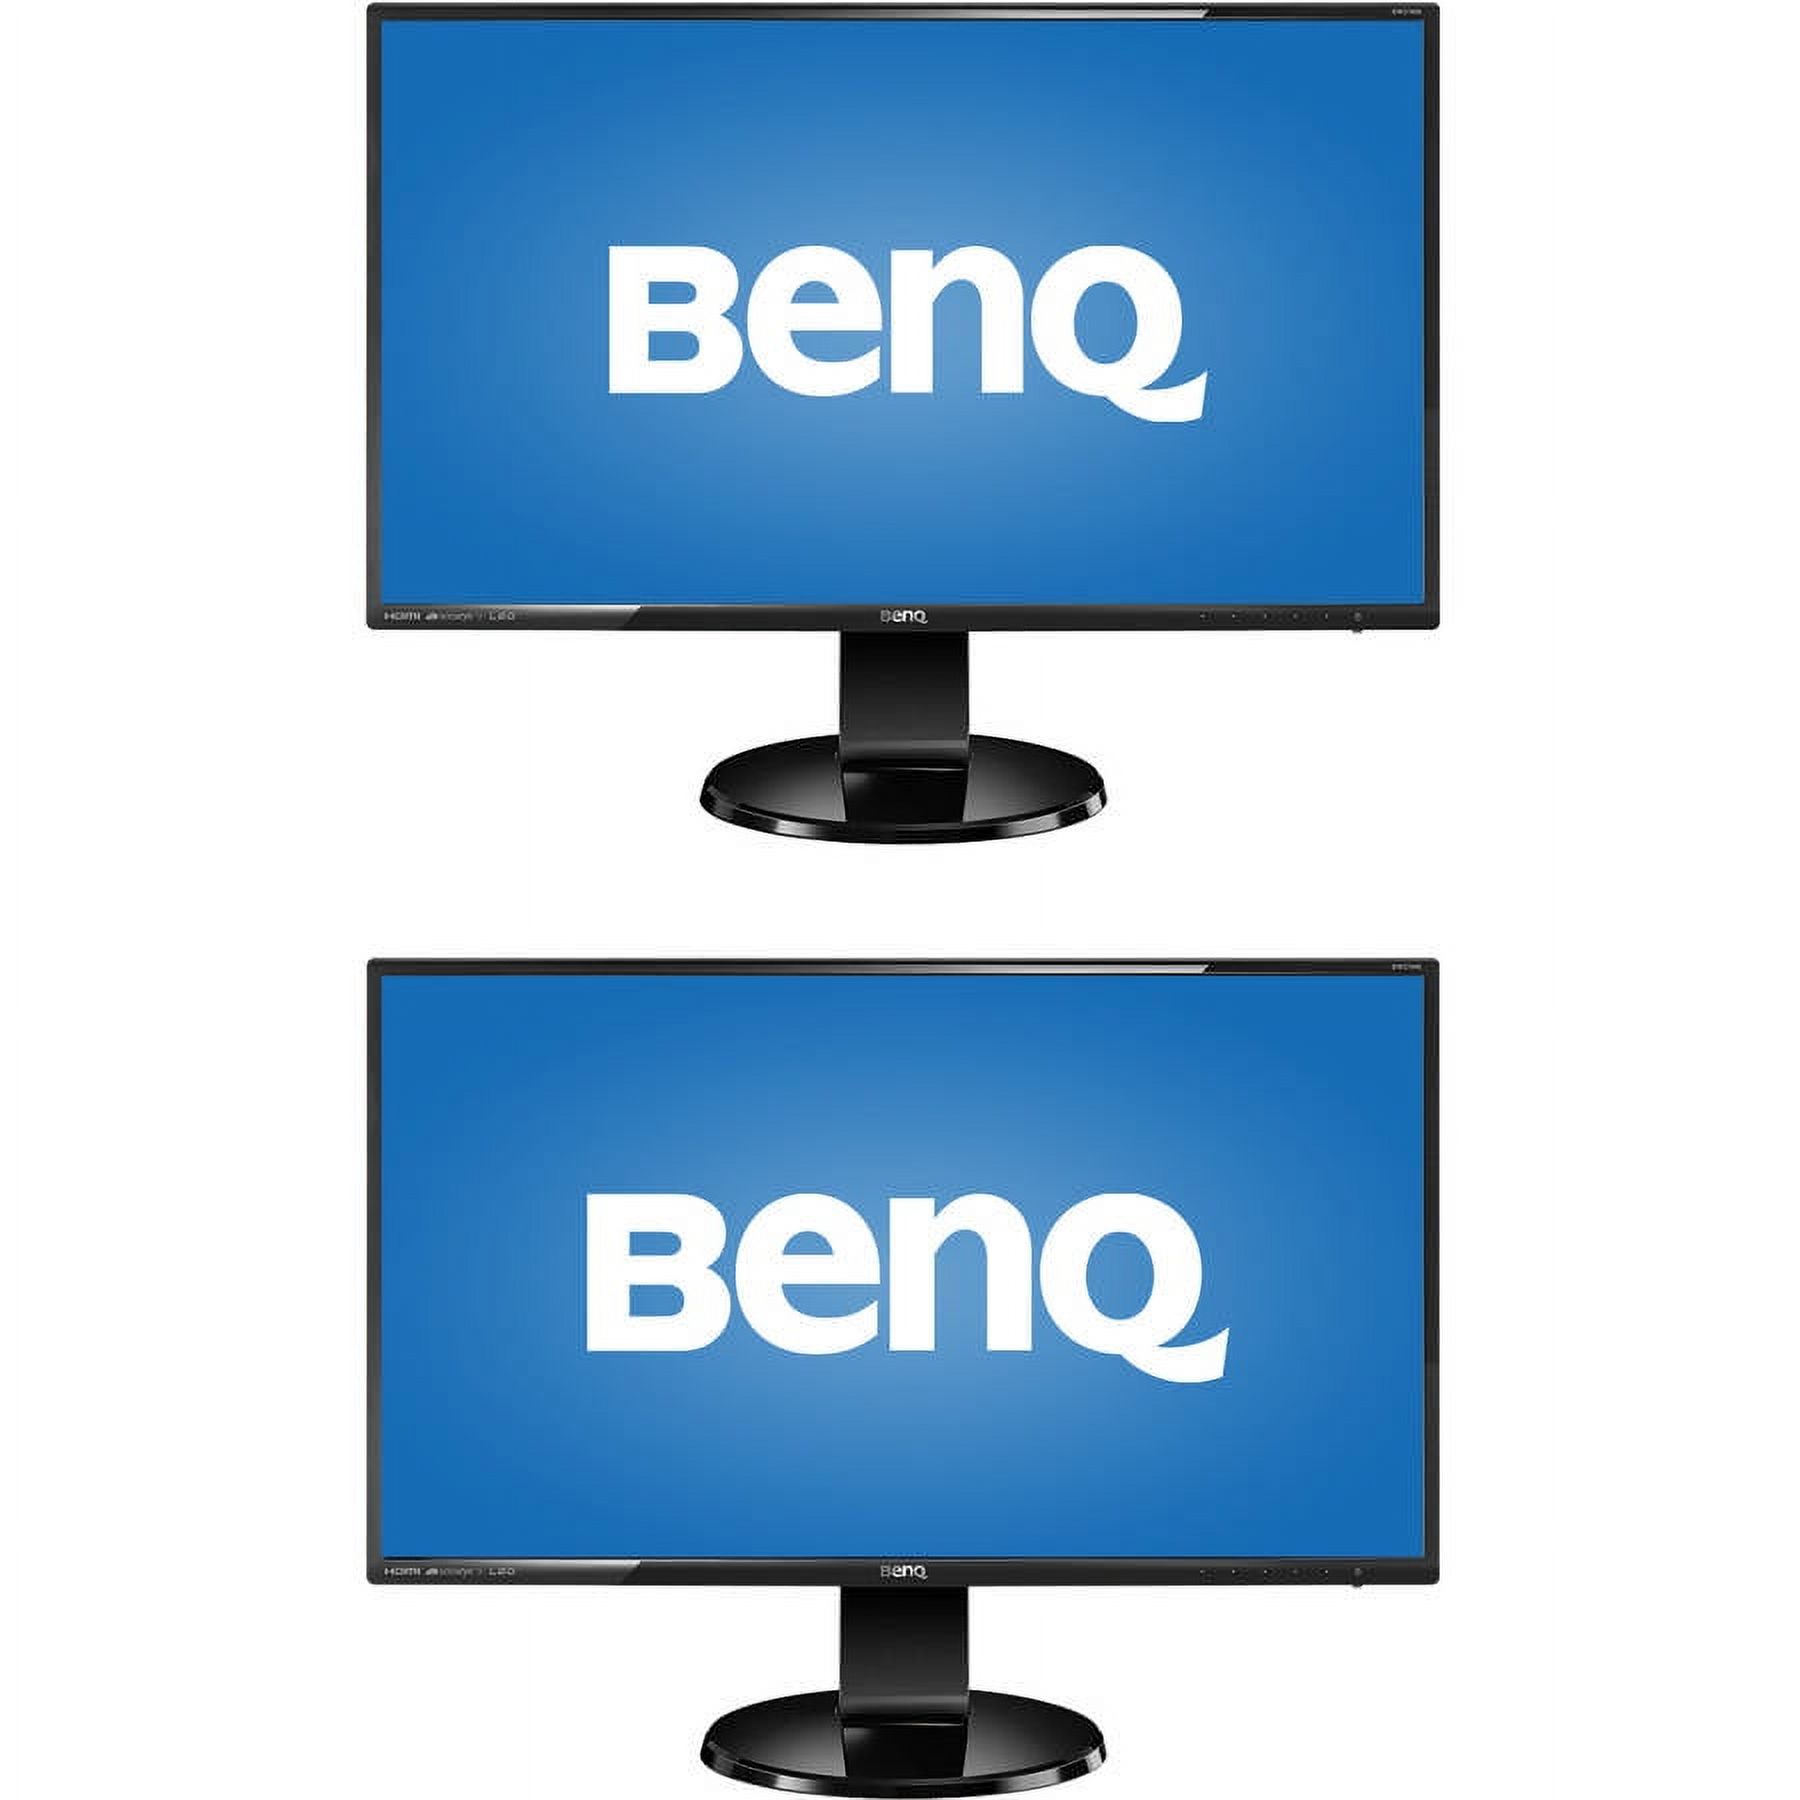 BenQ 27" LED Widescreen Home/Office Monitor (GW2760HS Black), 2-Pack - image 1 of 1